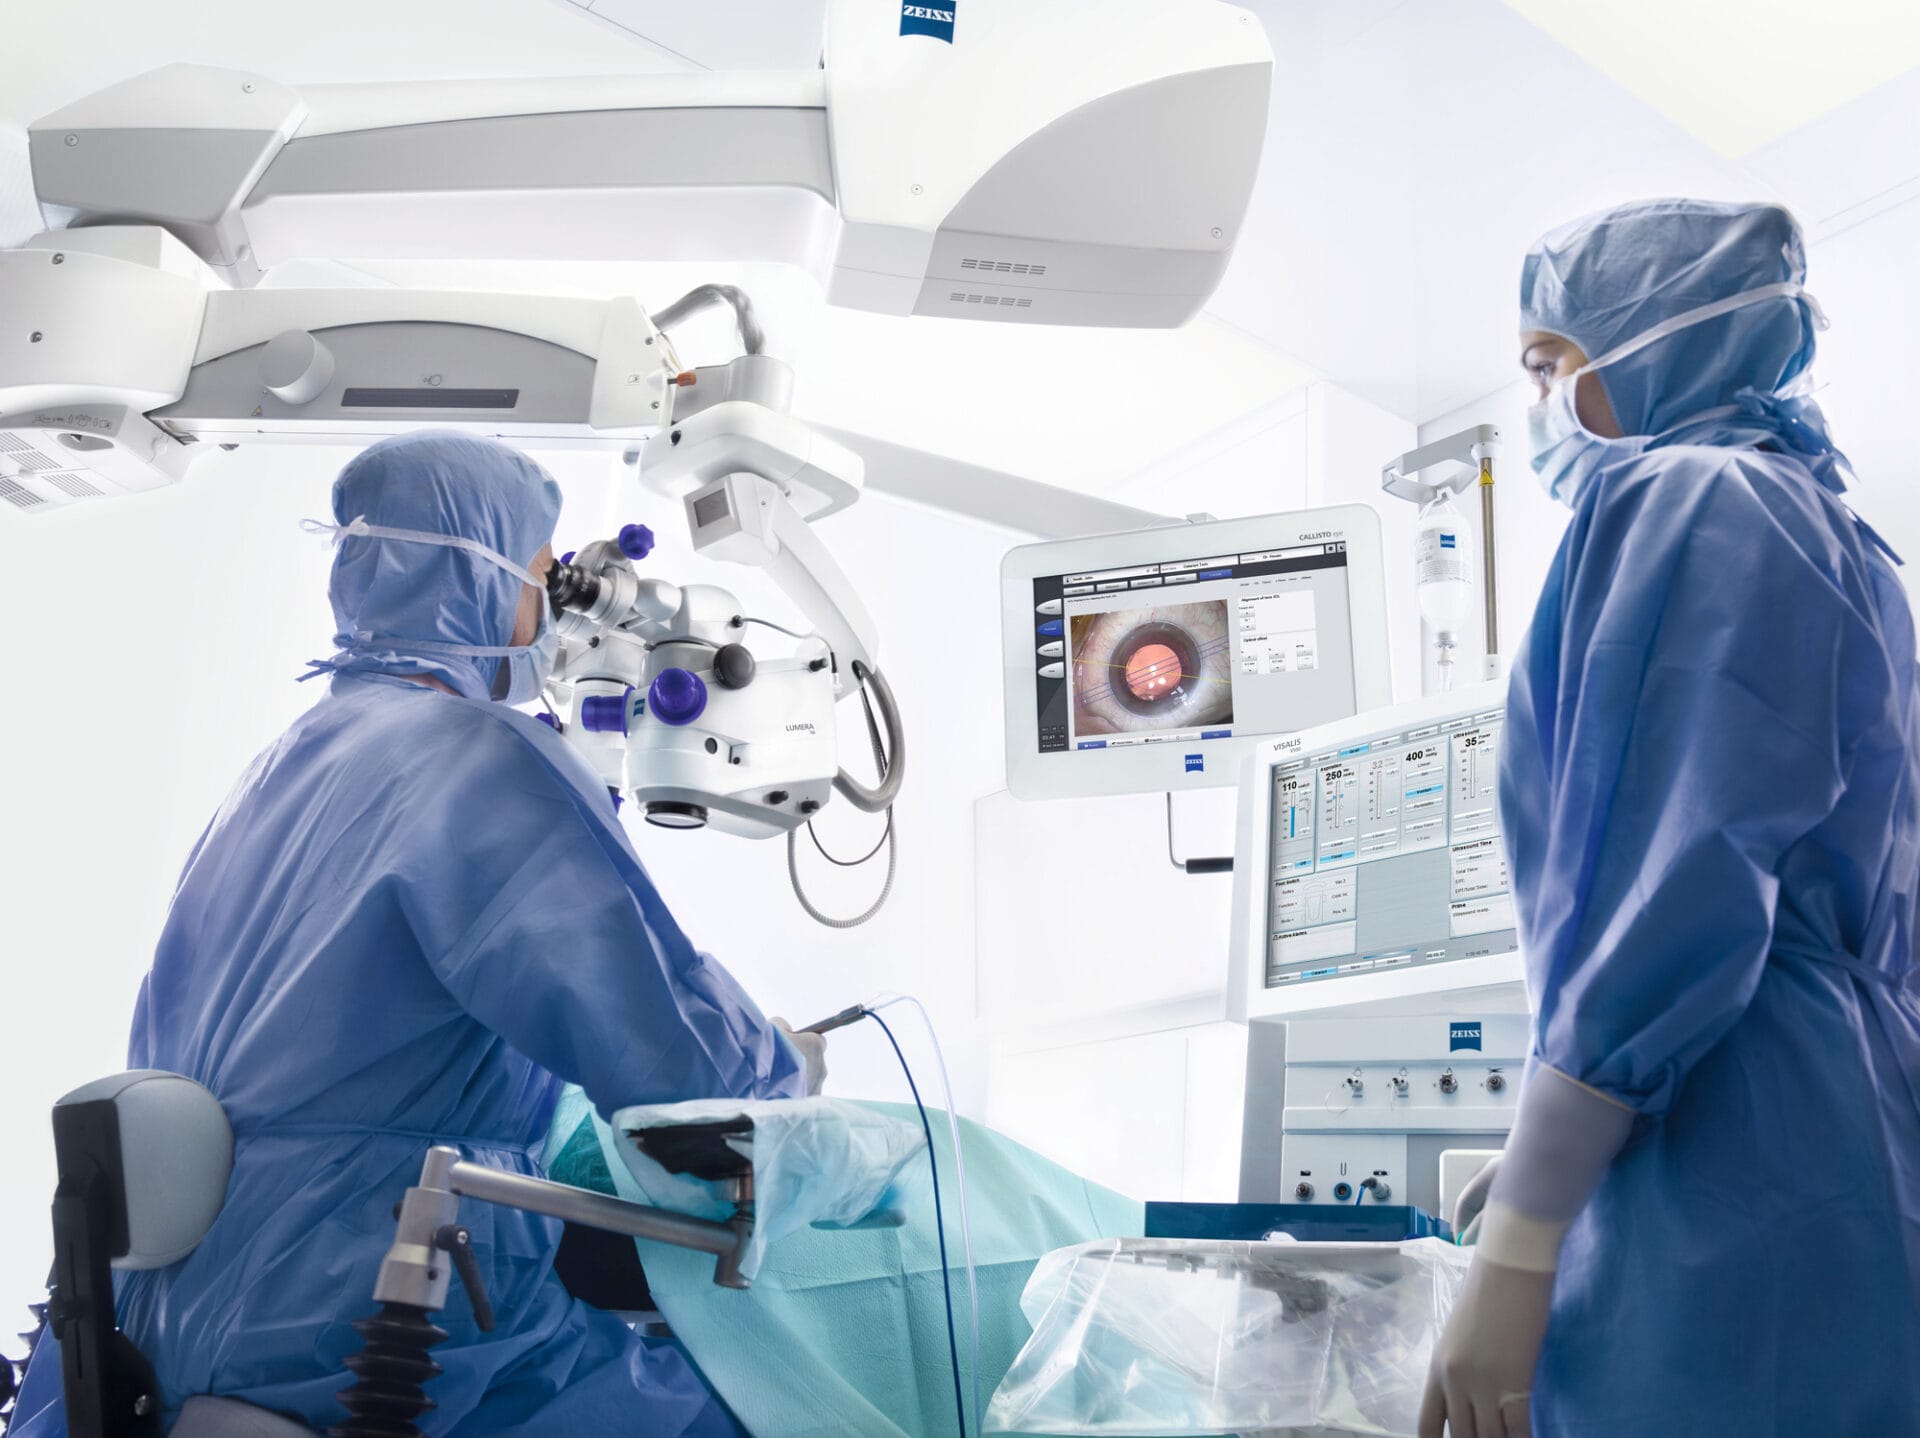 The ZEISS Cataract Suite with ZEISS CALLISTO® eye for computer assisted cataract surgery